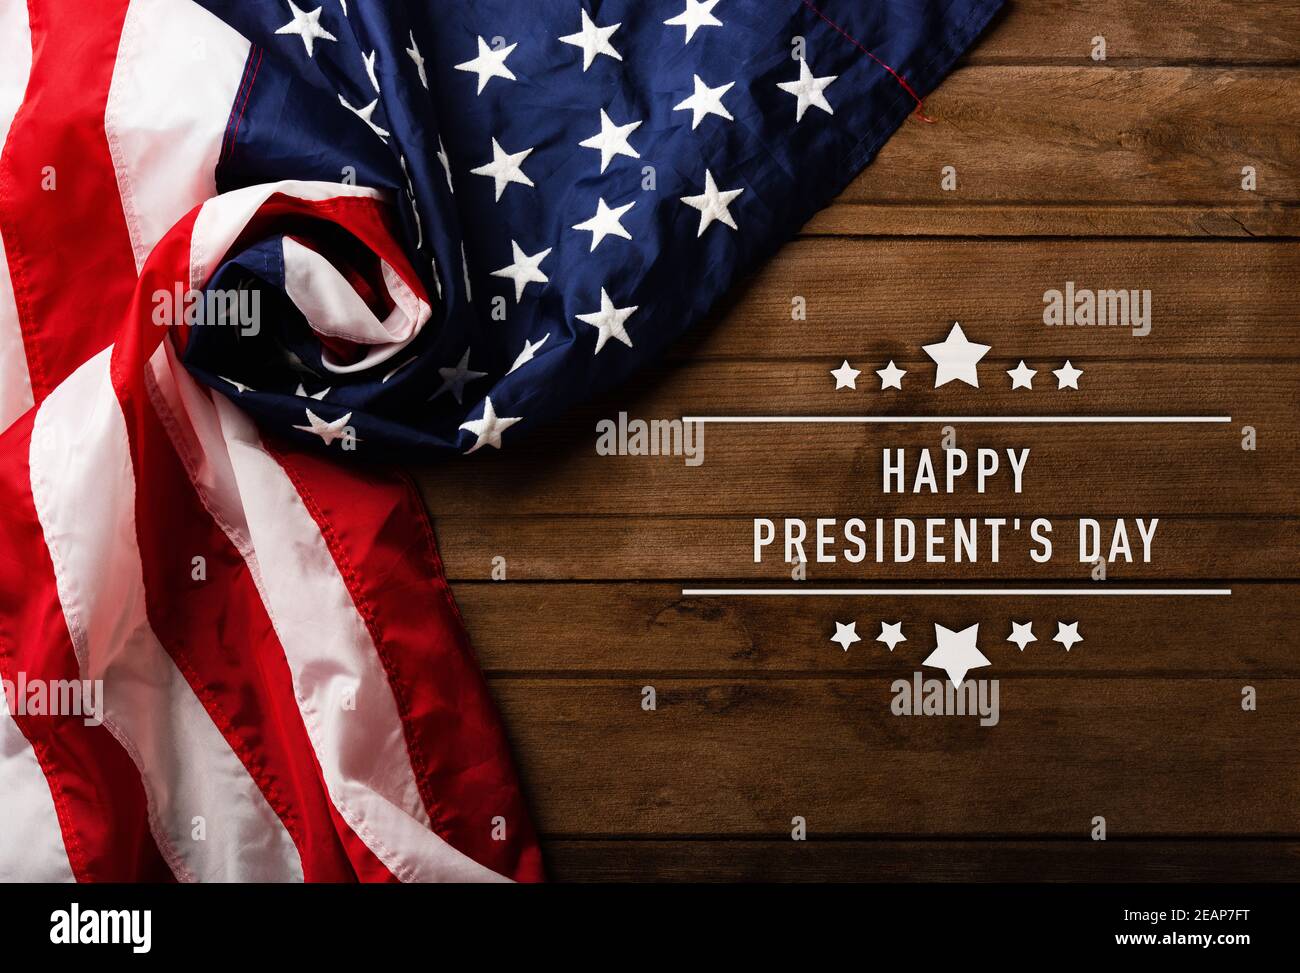 American or USA Flag with 'HAPPY PRESIDENT'S DAY' text Stock Photo